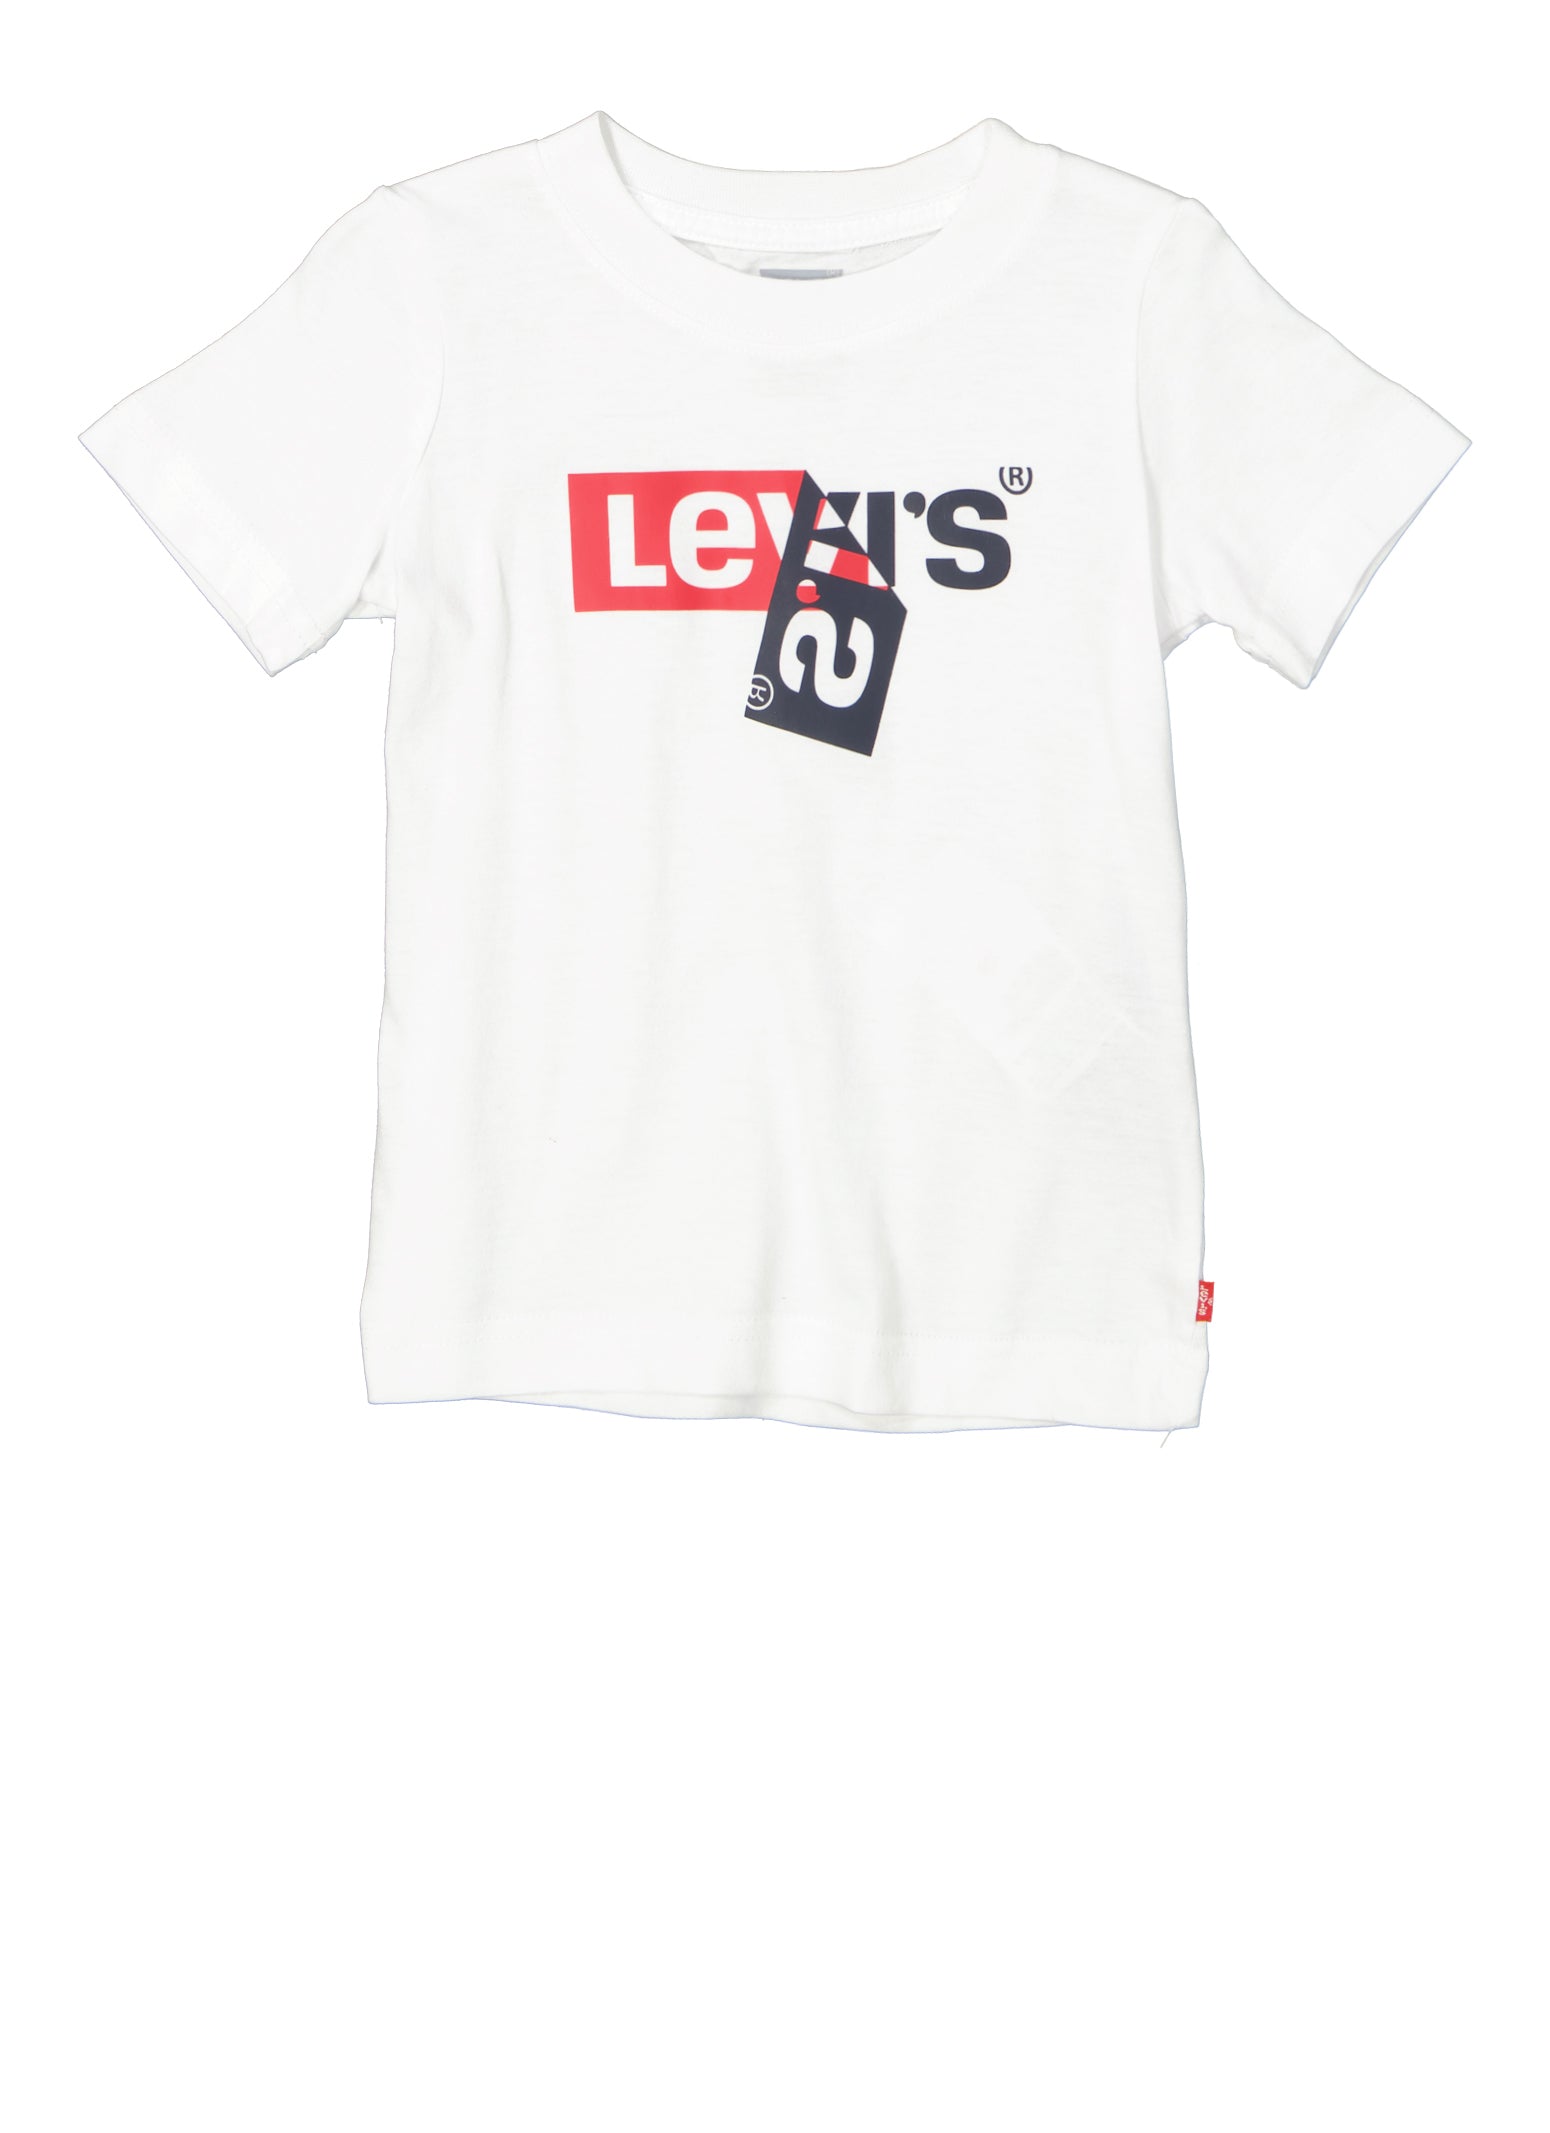 Toddler Boys Levis Peel Off Graphic Tee